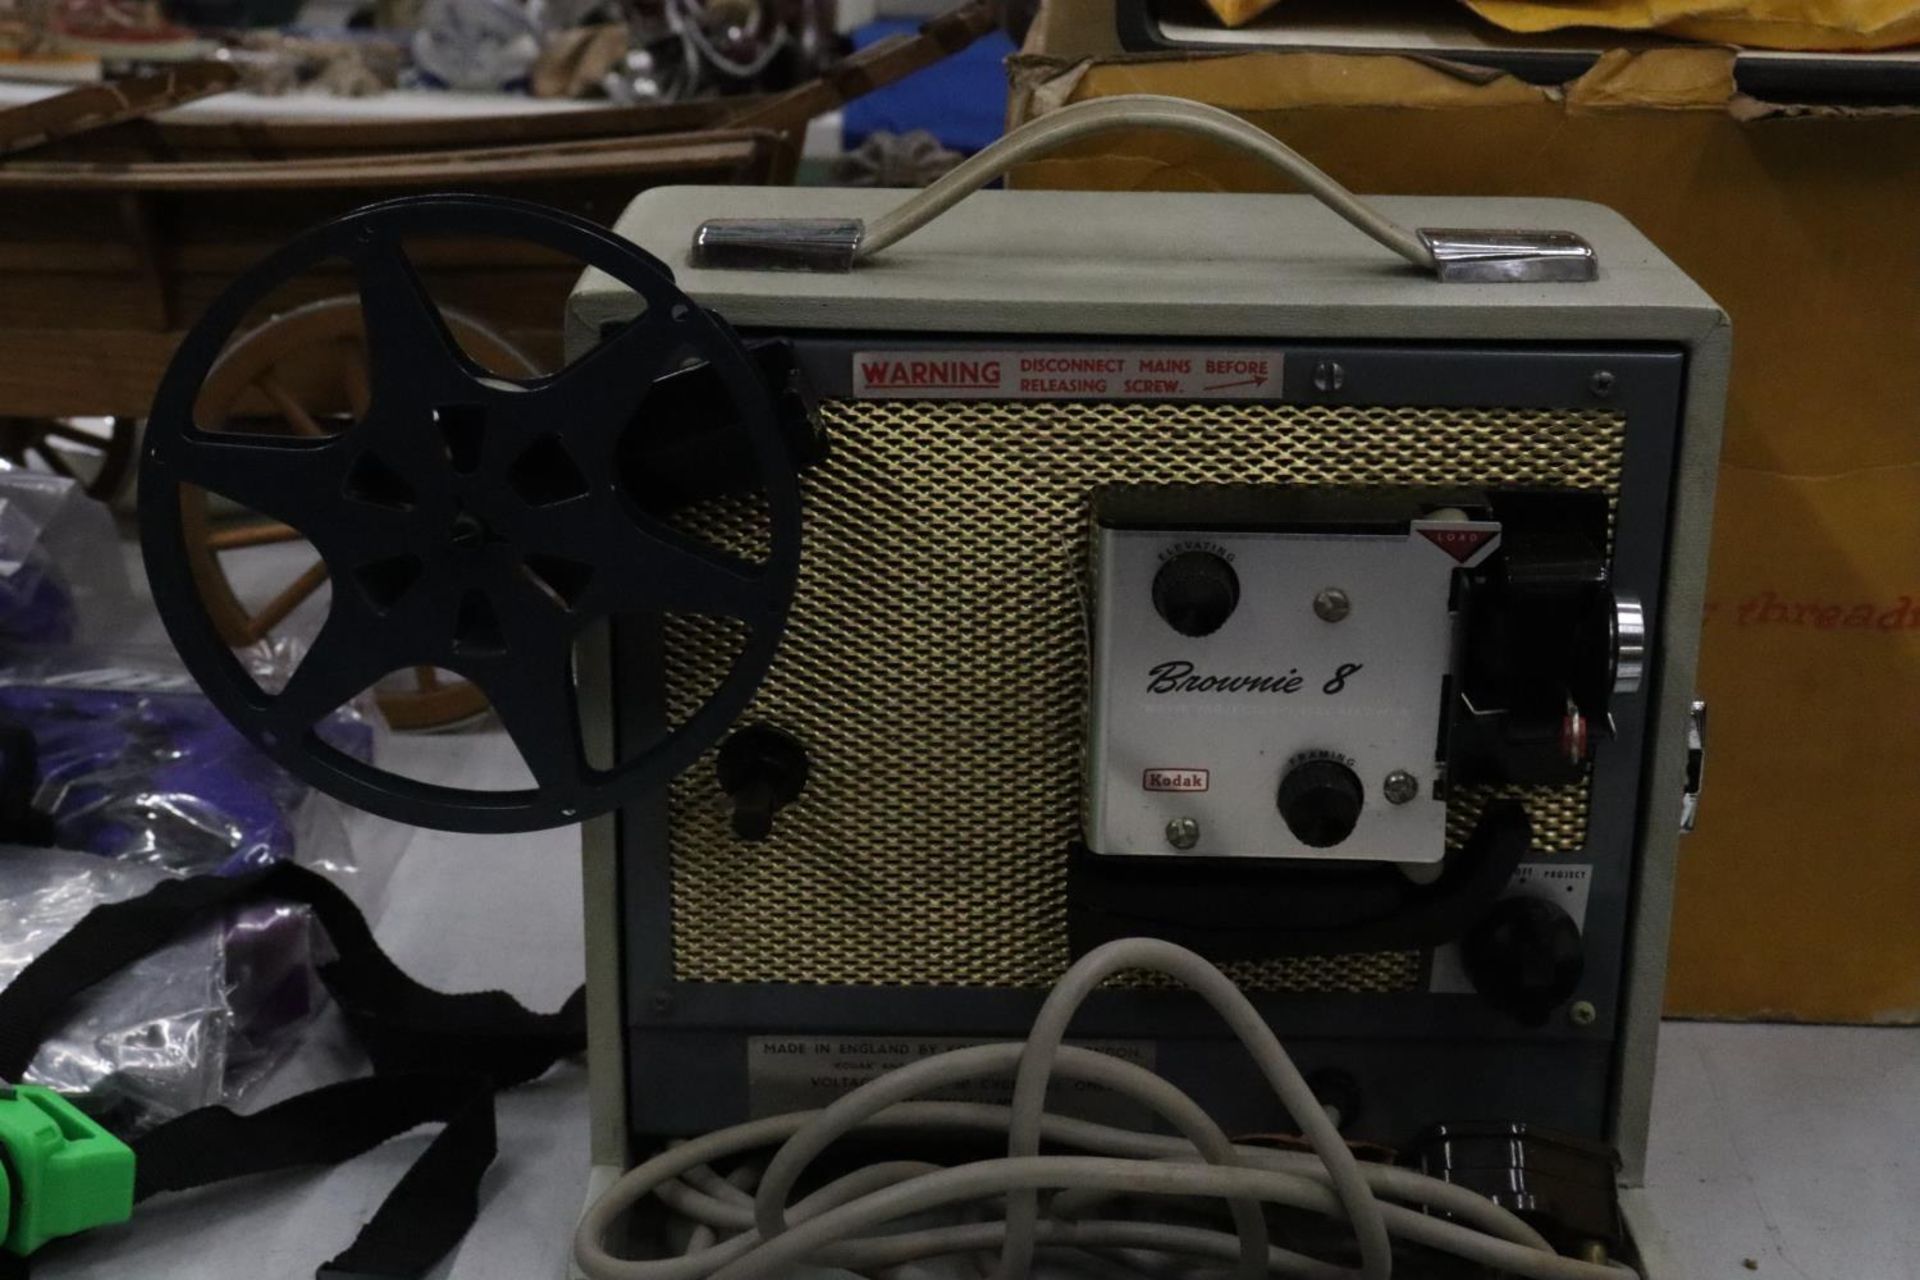 A KODAK BROWNIE & CINE PROJECTOR 8MM A15G BOXED WITH REELS - Image 8 of 8